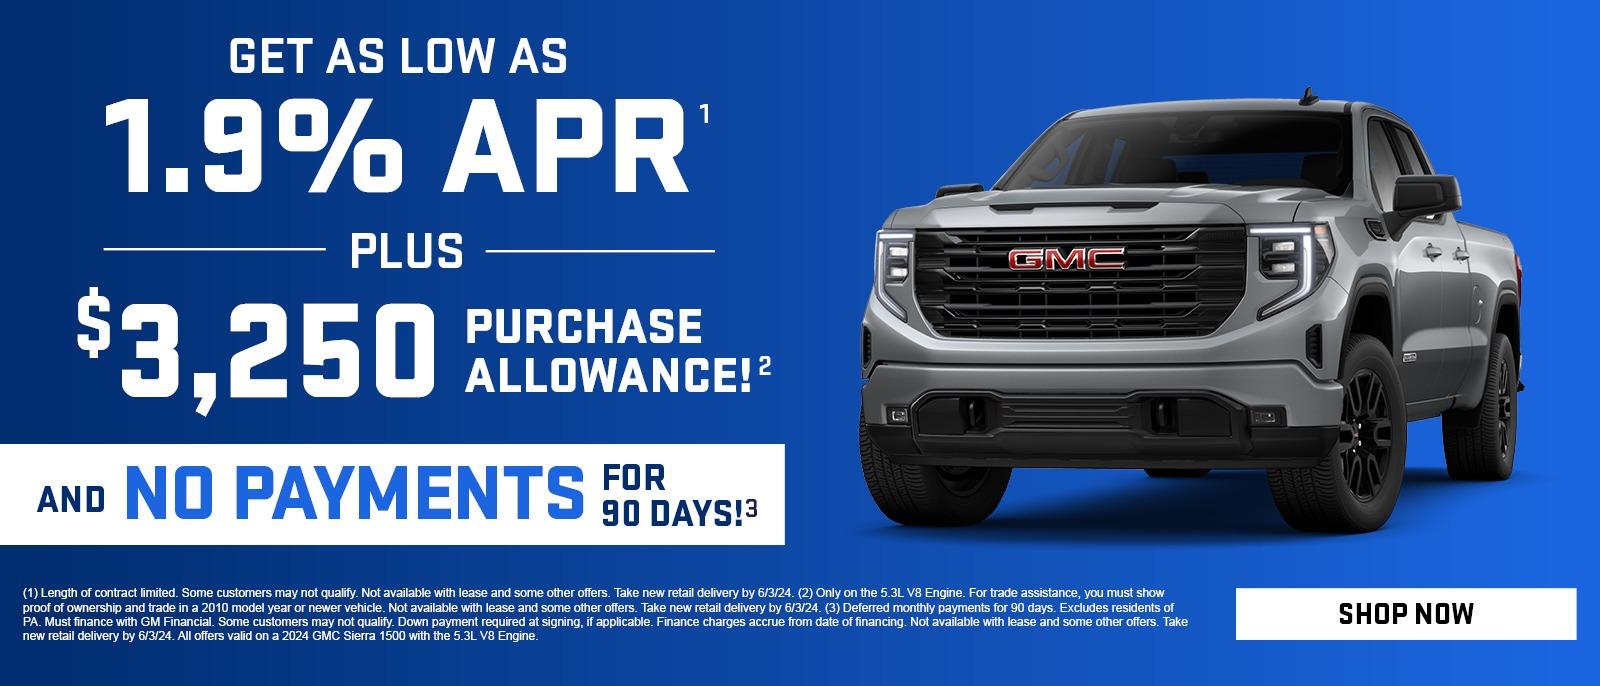 Get as low as
1.9% APR
Plus
$3,250 purchase allowance!
And No payments for 90 days!